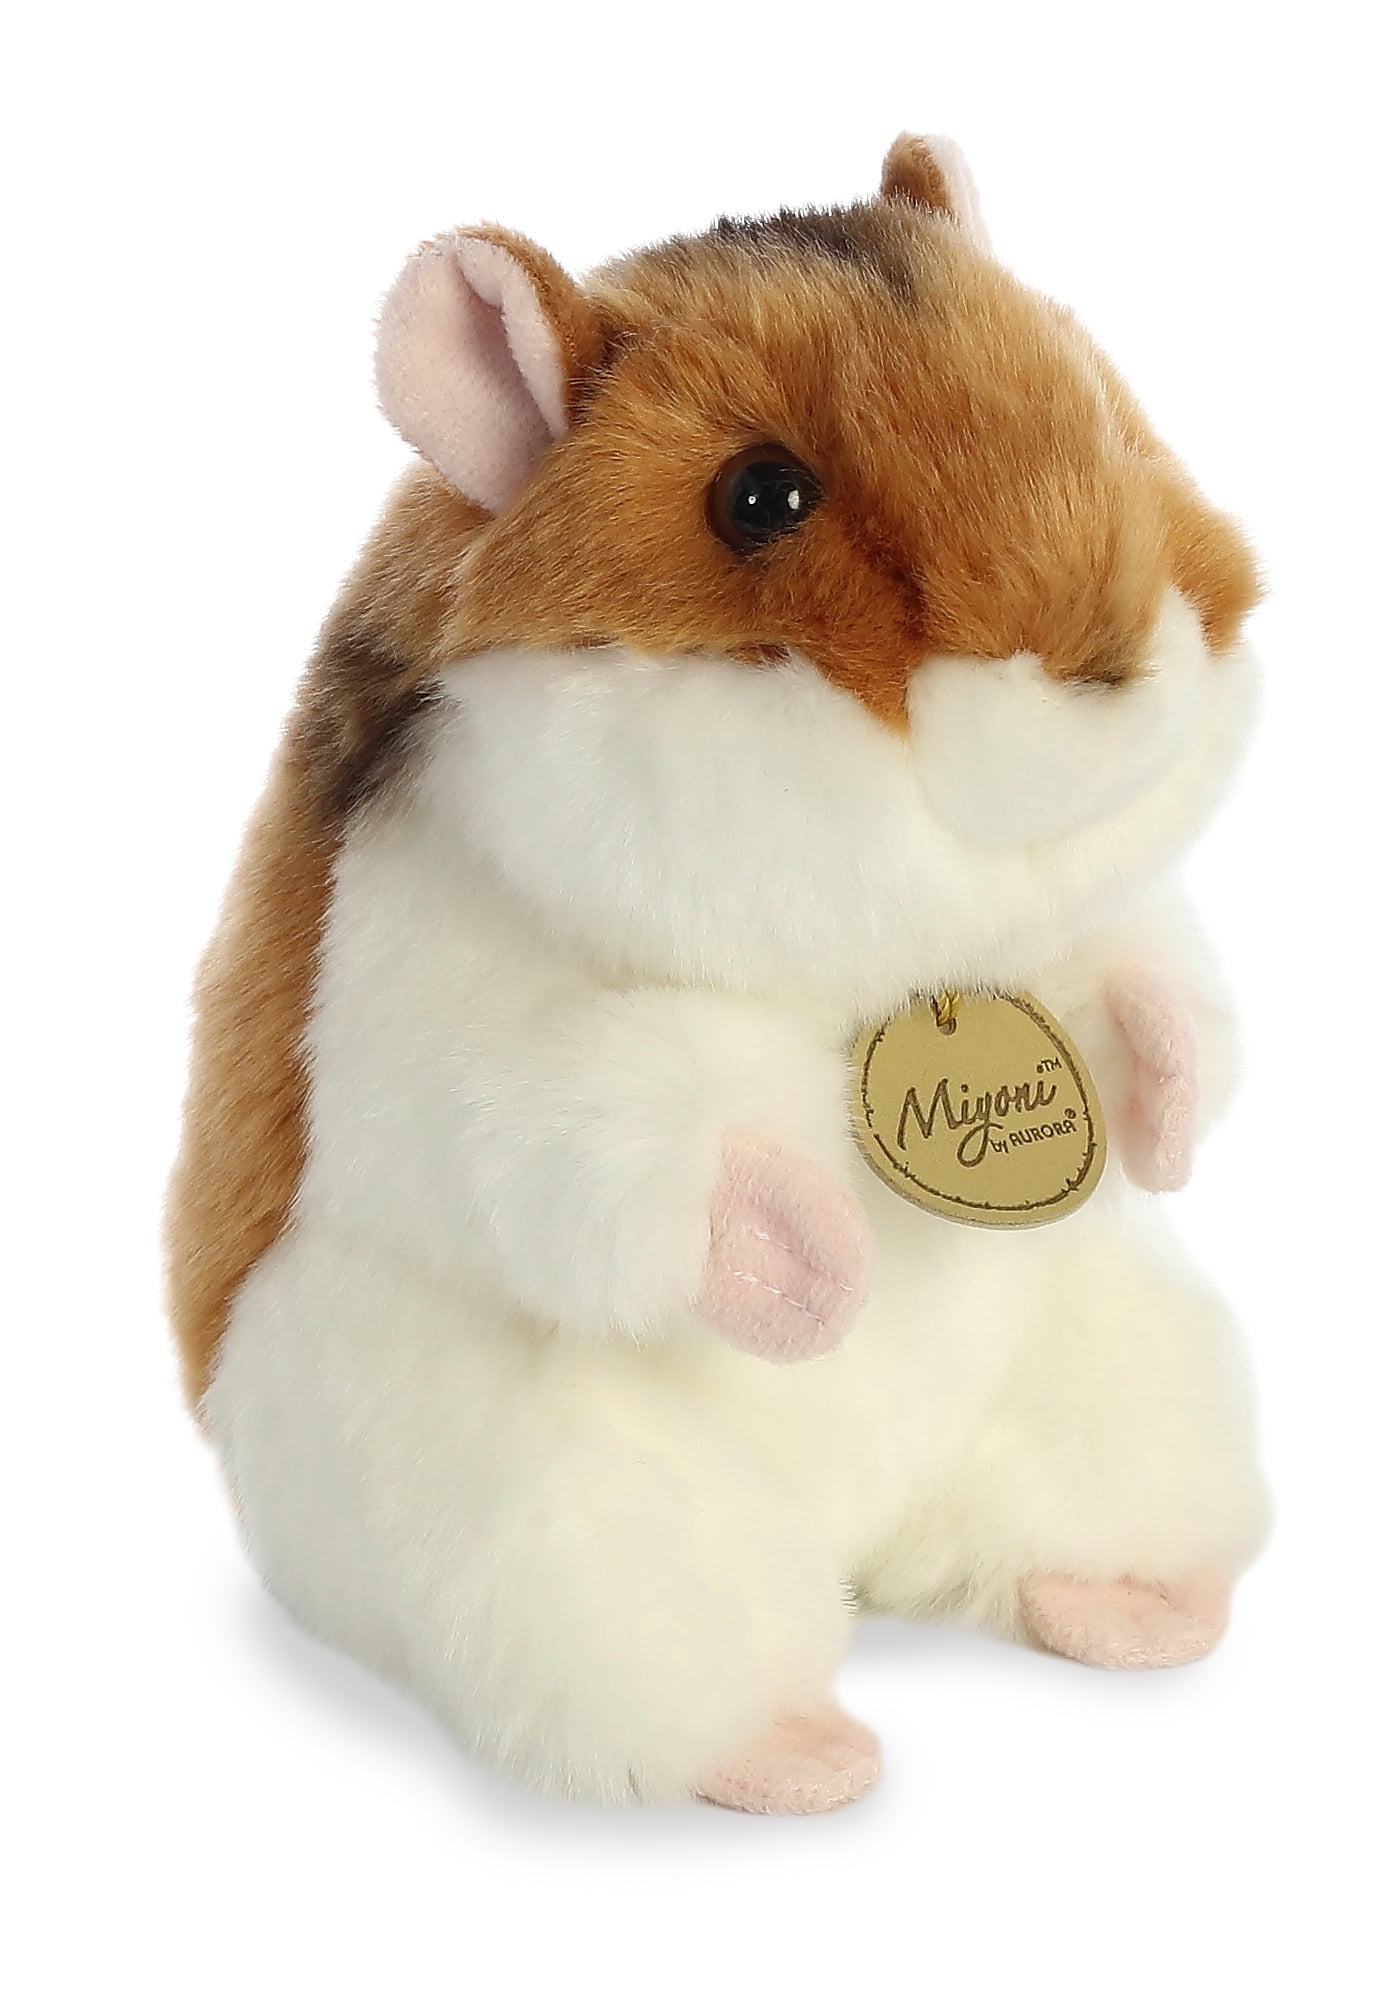 Chippy the Hamster6 Inch Stuffed Animal Plush GerbilBy Tiger Tale Toys